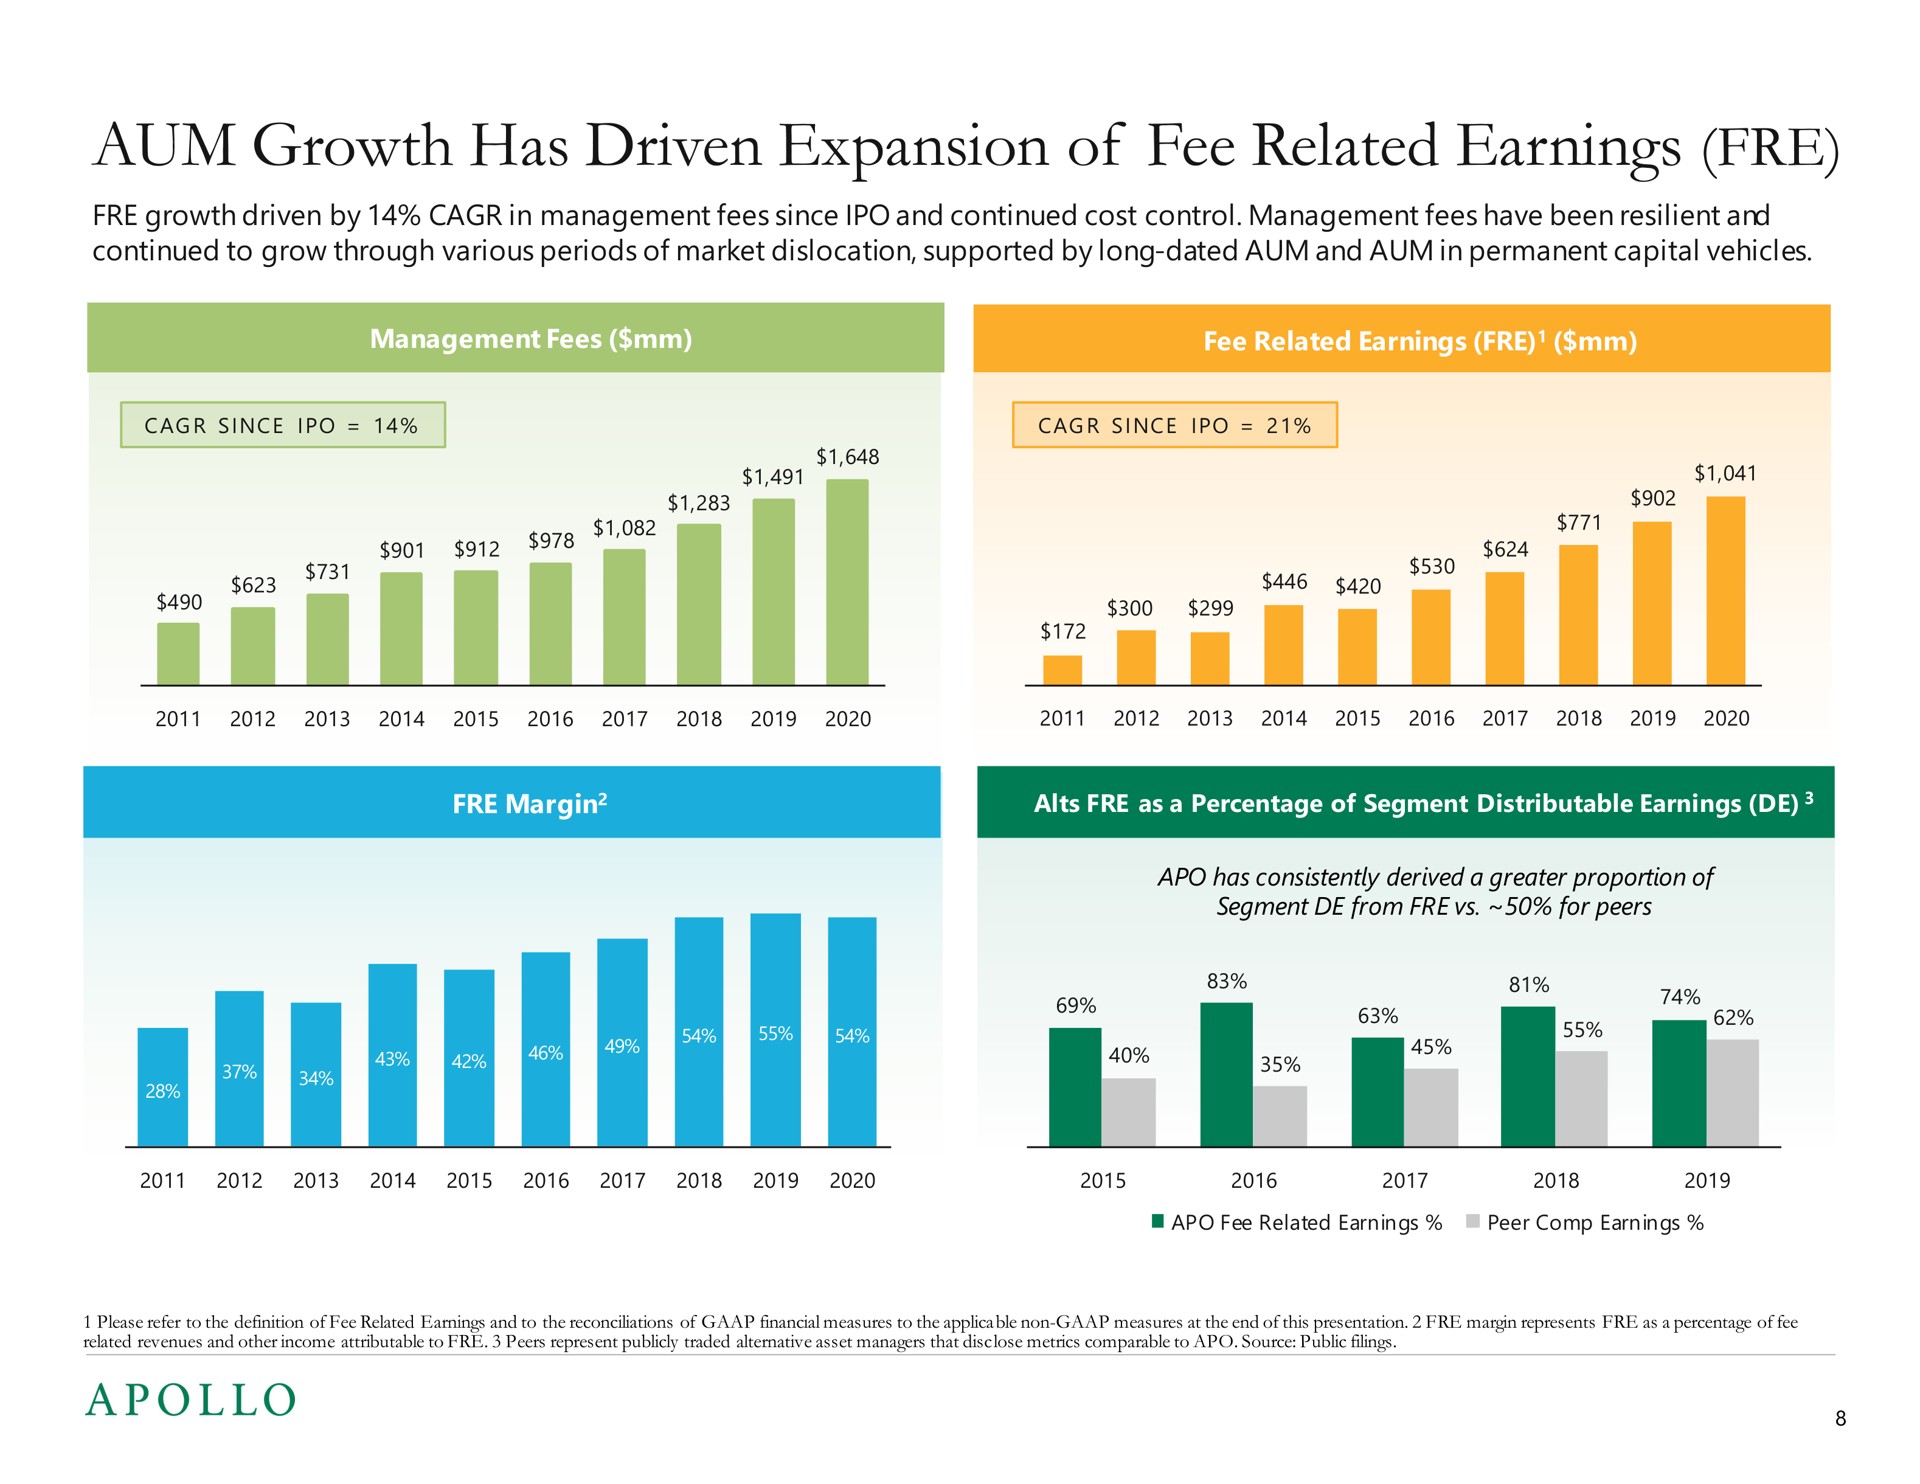 aum growth has driven expansion of fee related earnings | Apollo Global Management